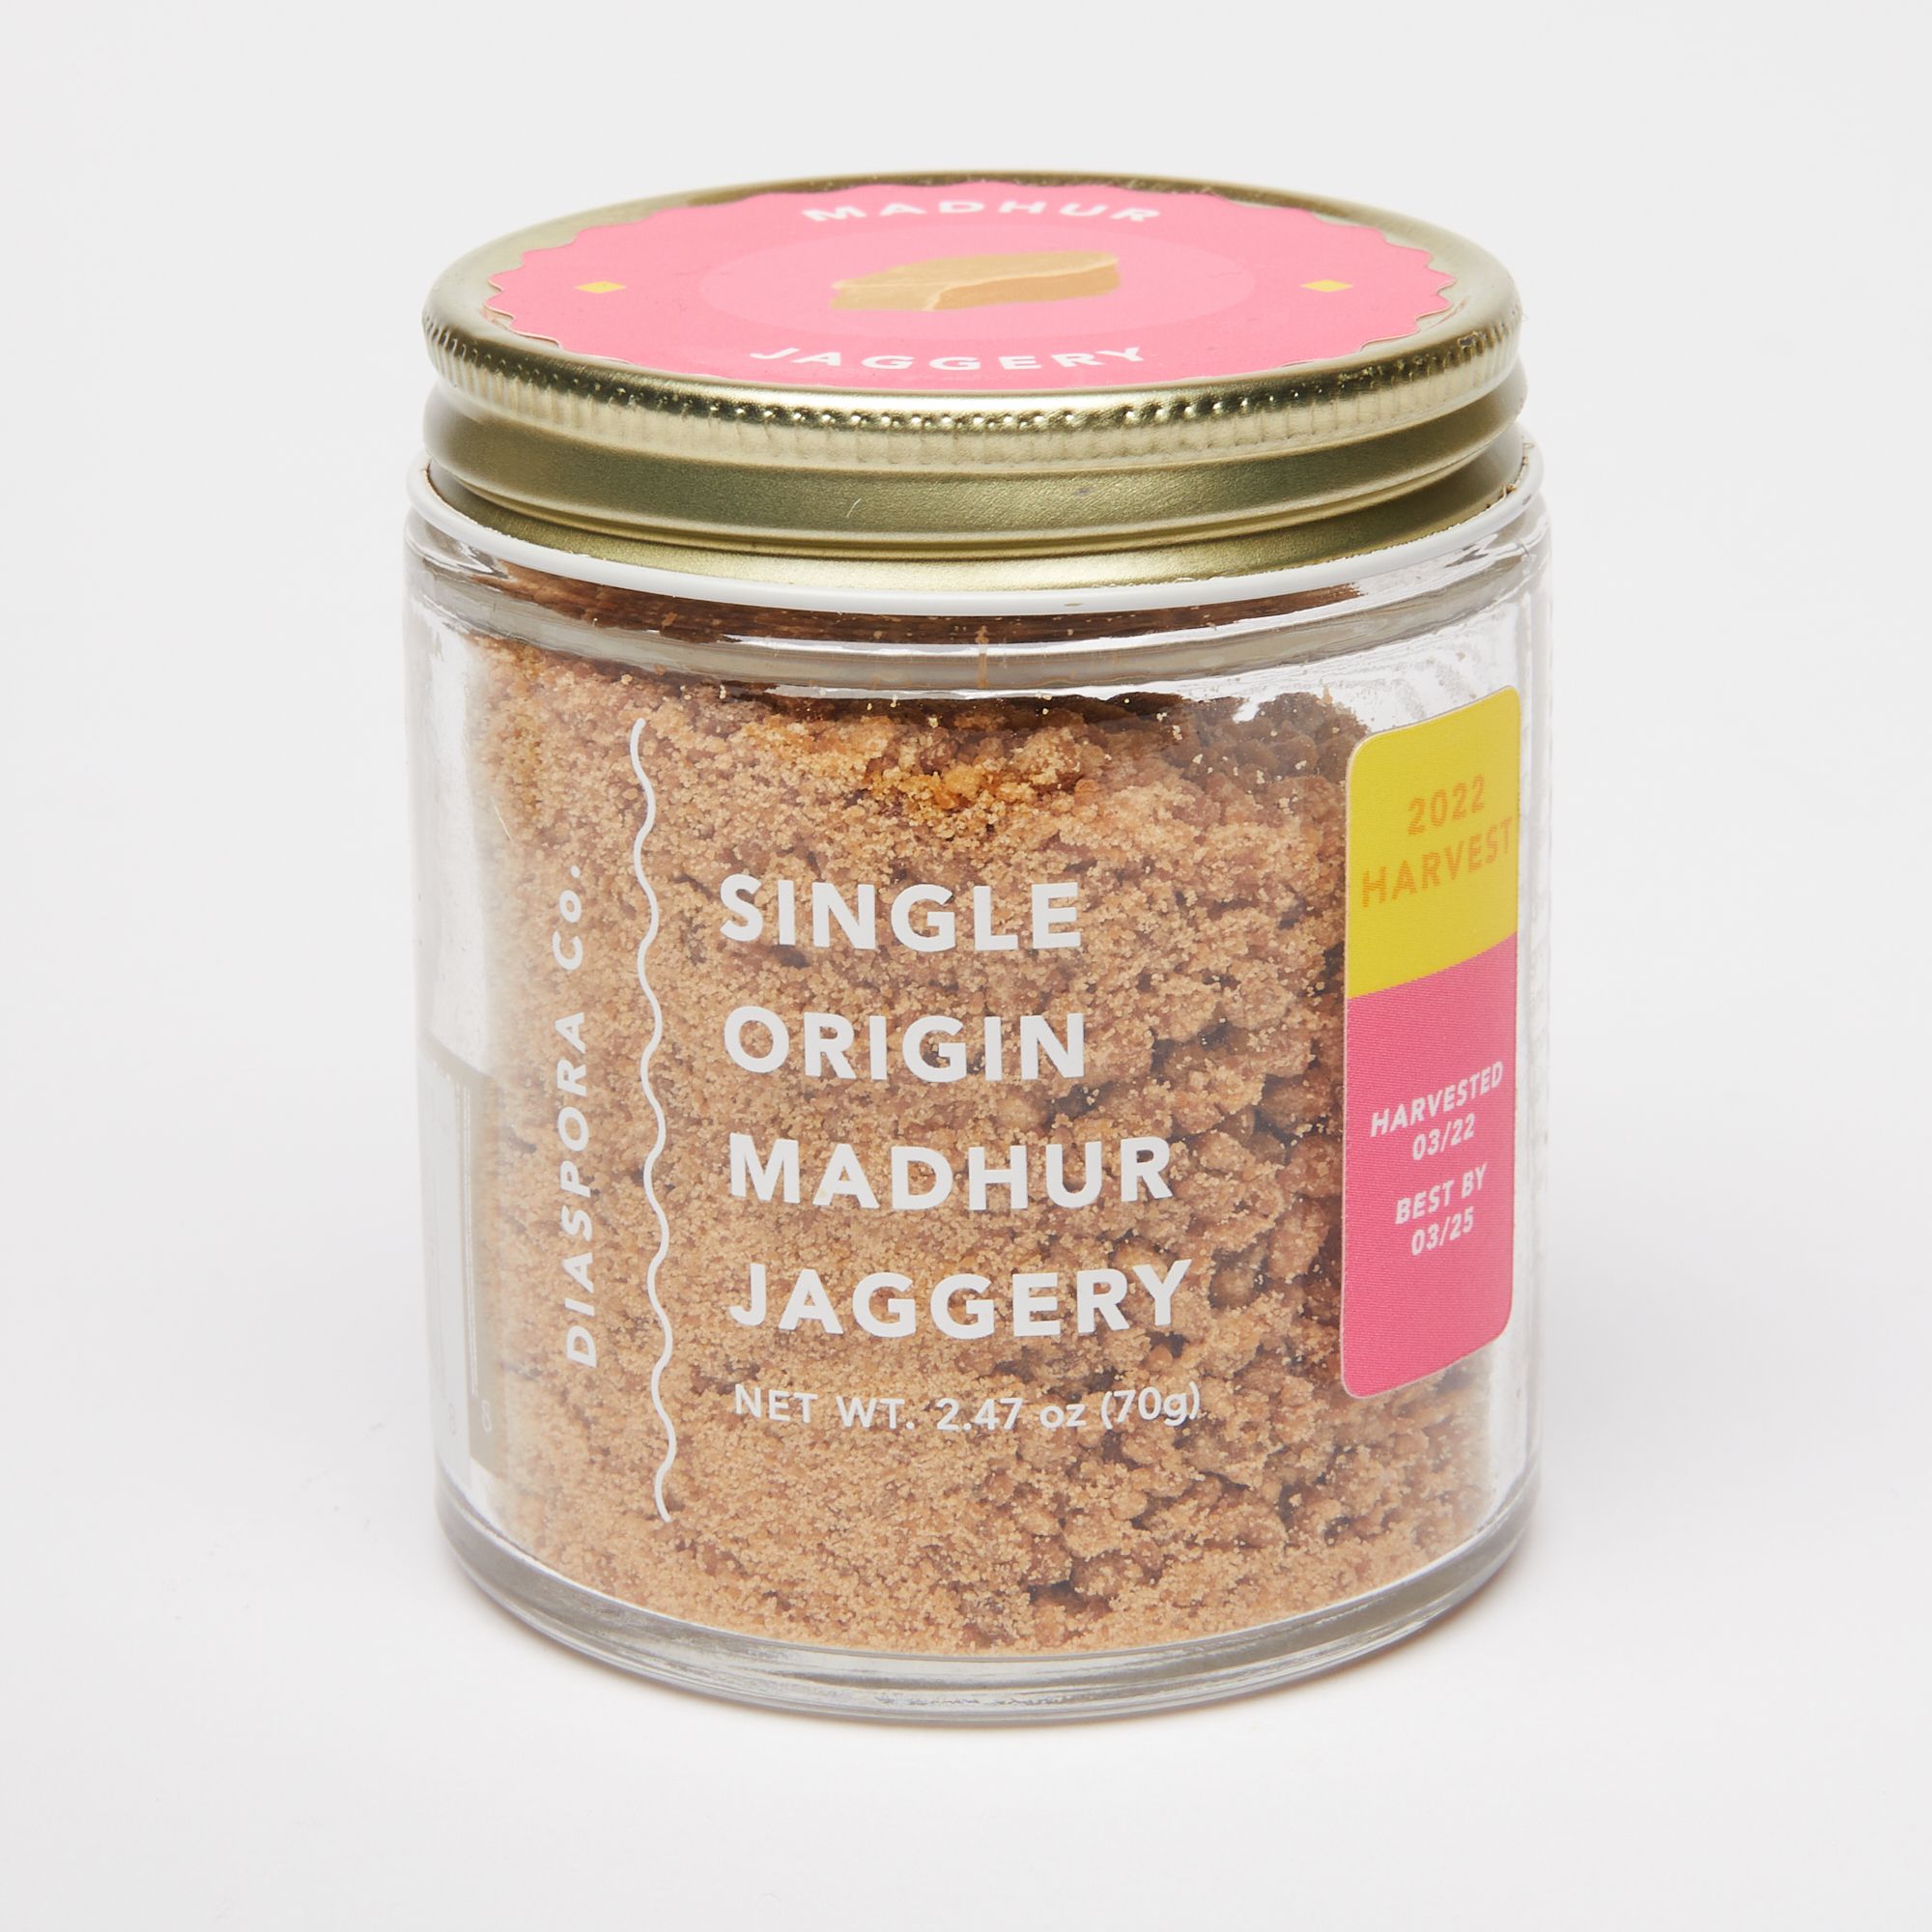 Short glass jar with a metal screw top with a pink label, the jar reads "Single Origin Madhur Jaggery"